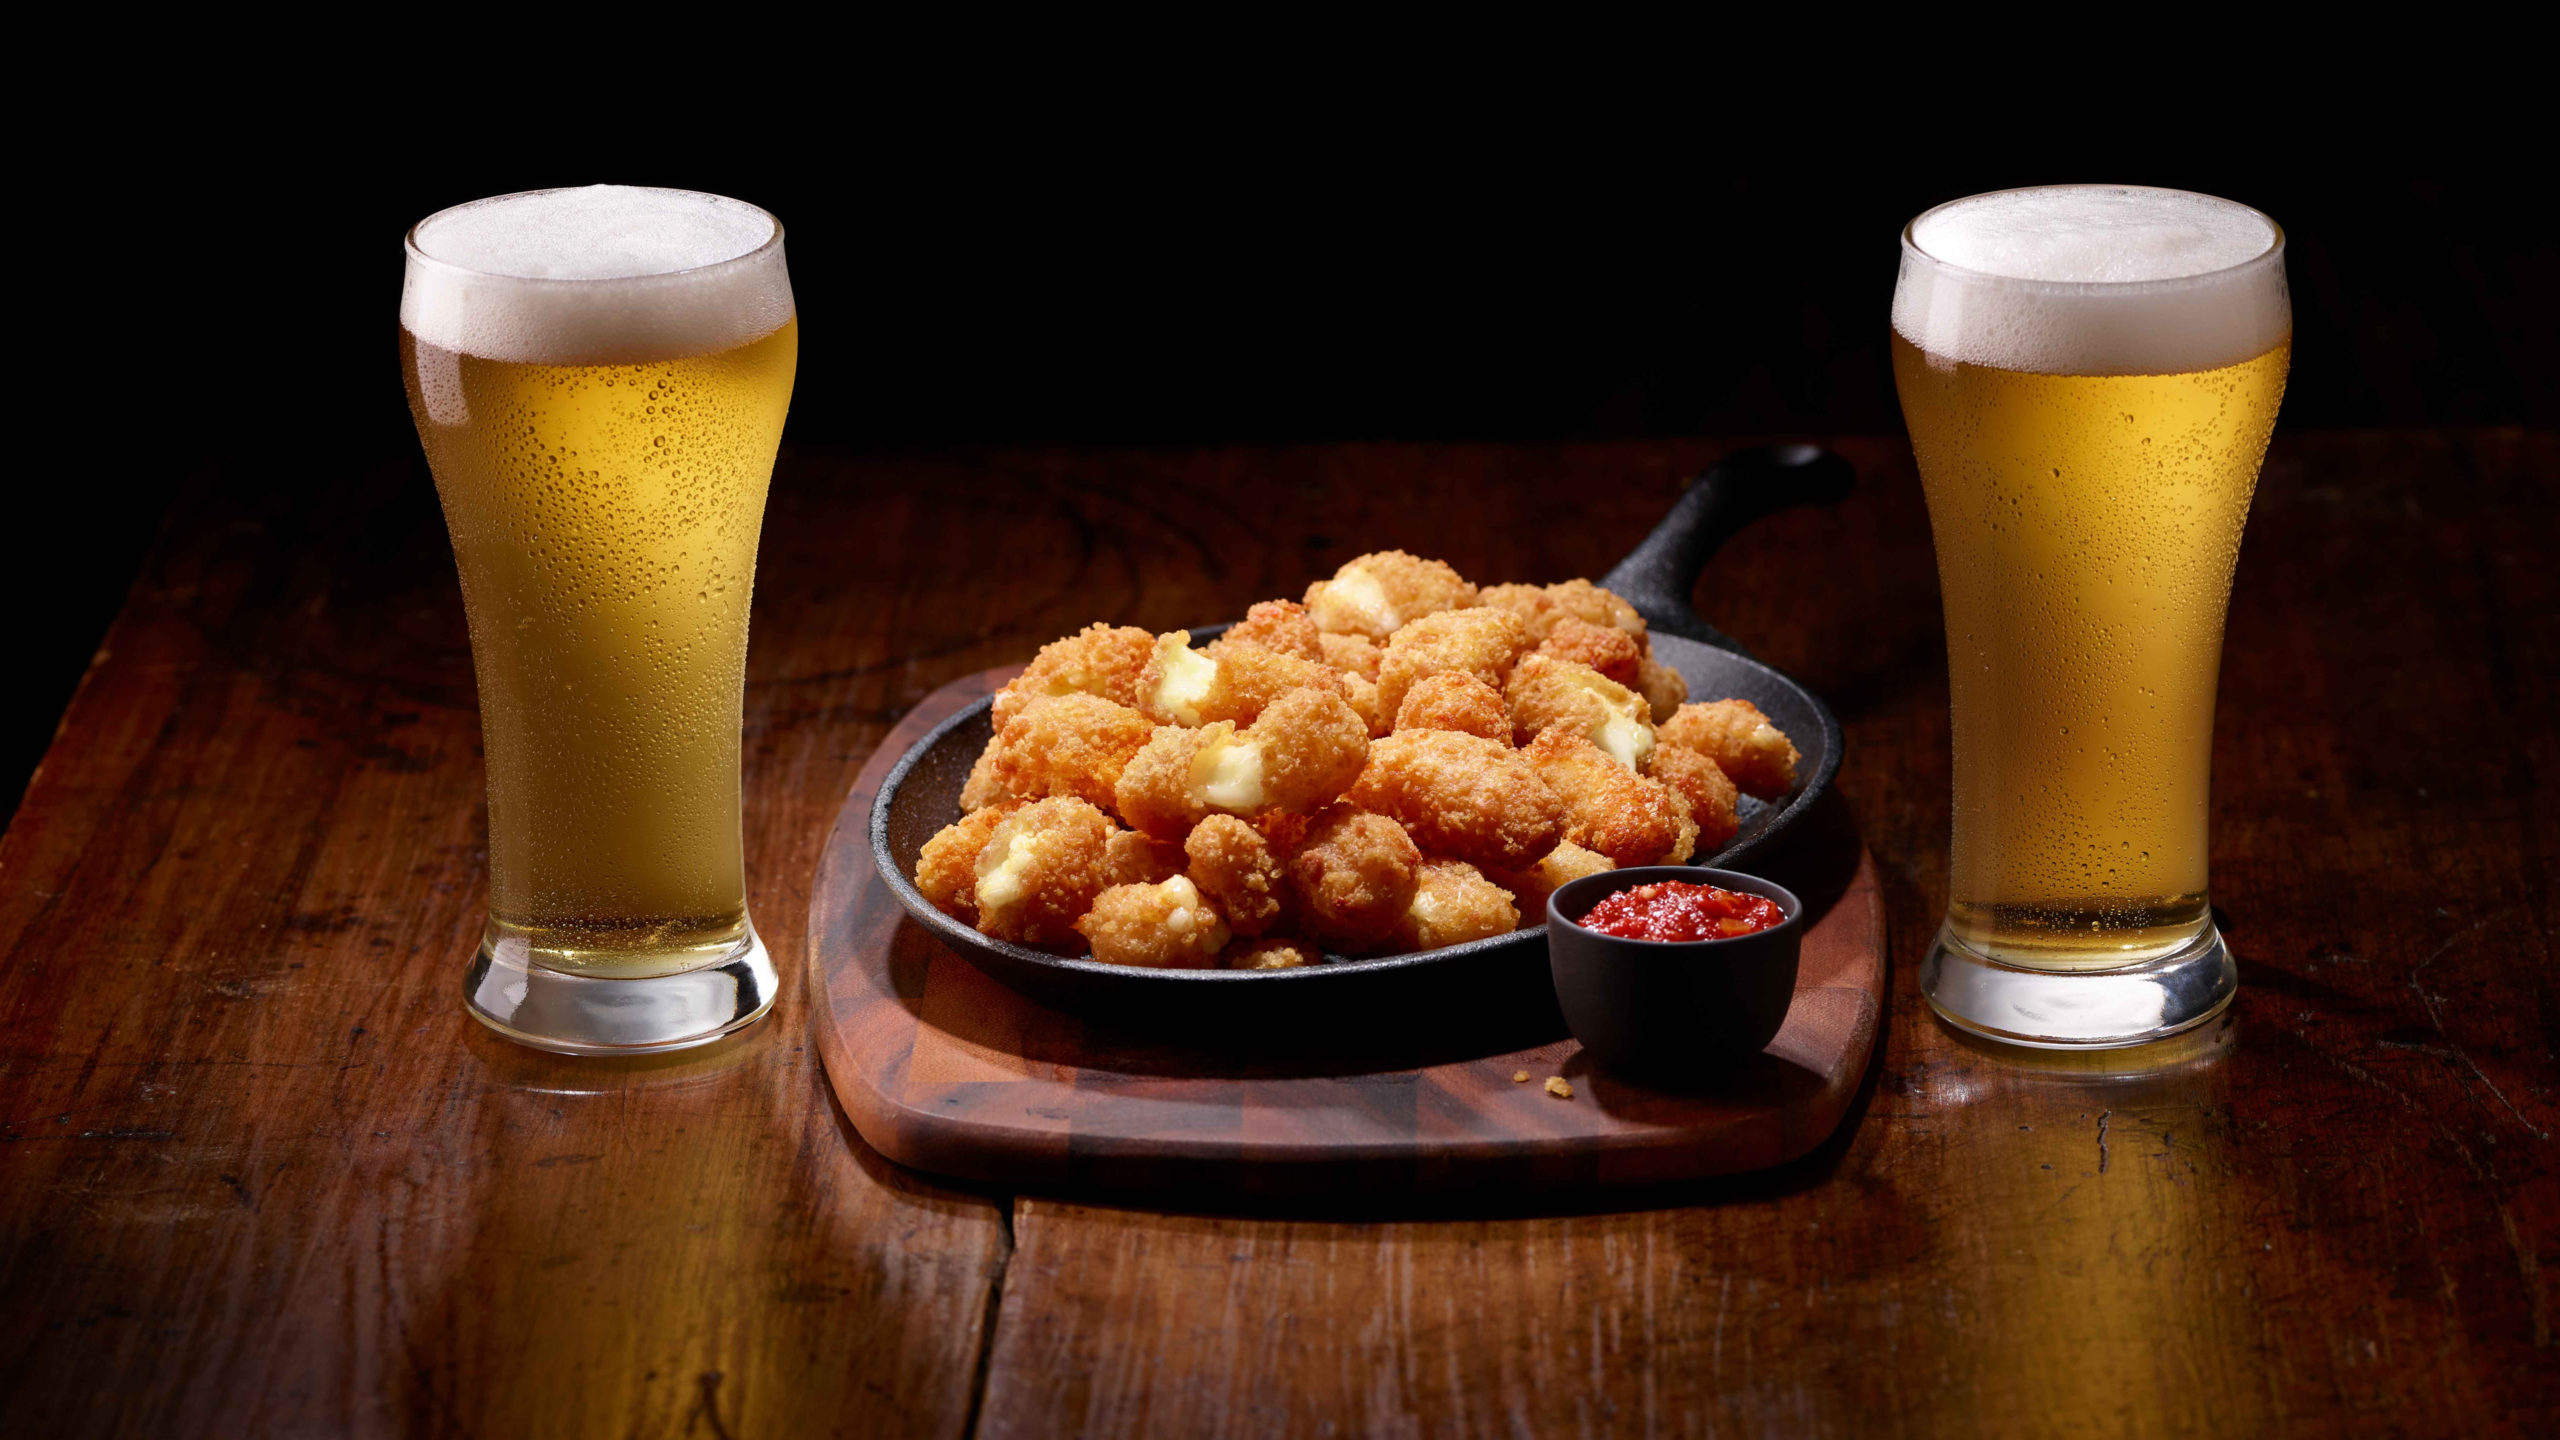 McCain Anchor Spicy Cheese Curds and Beers